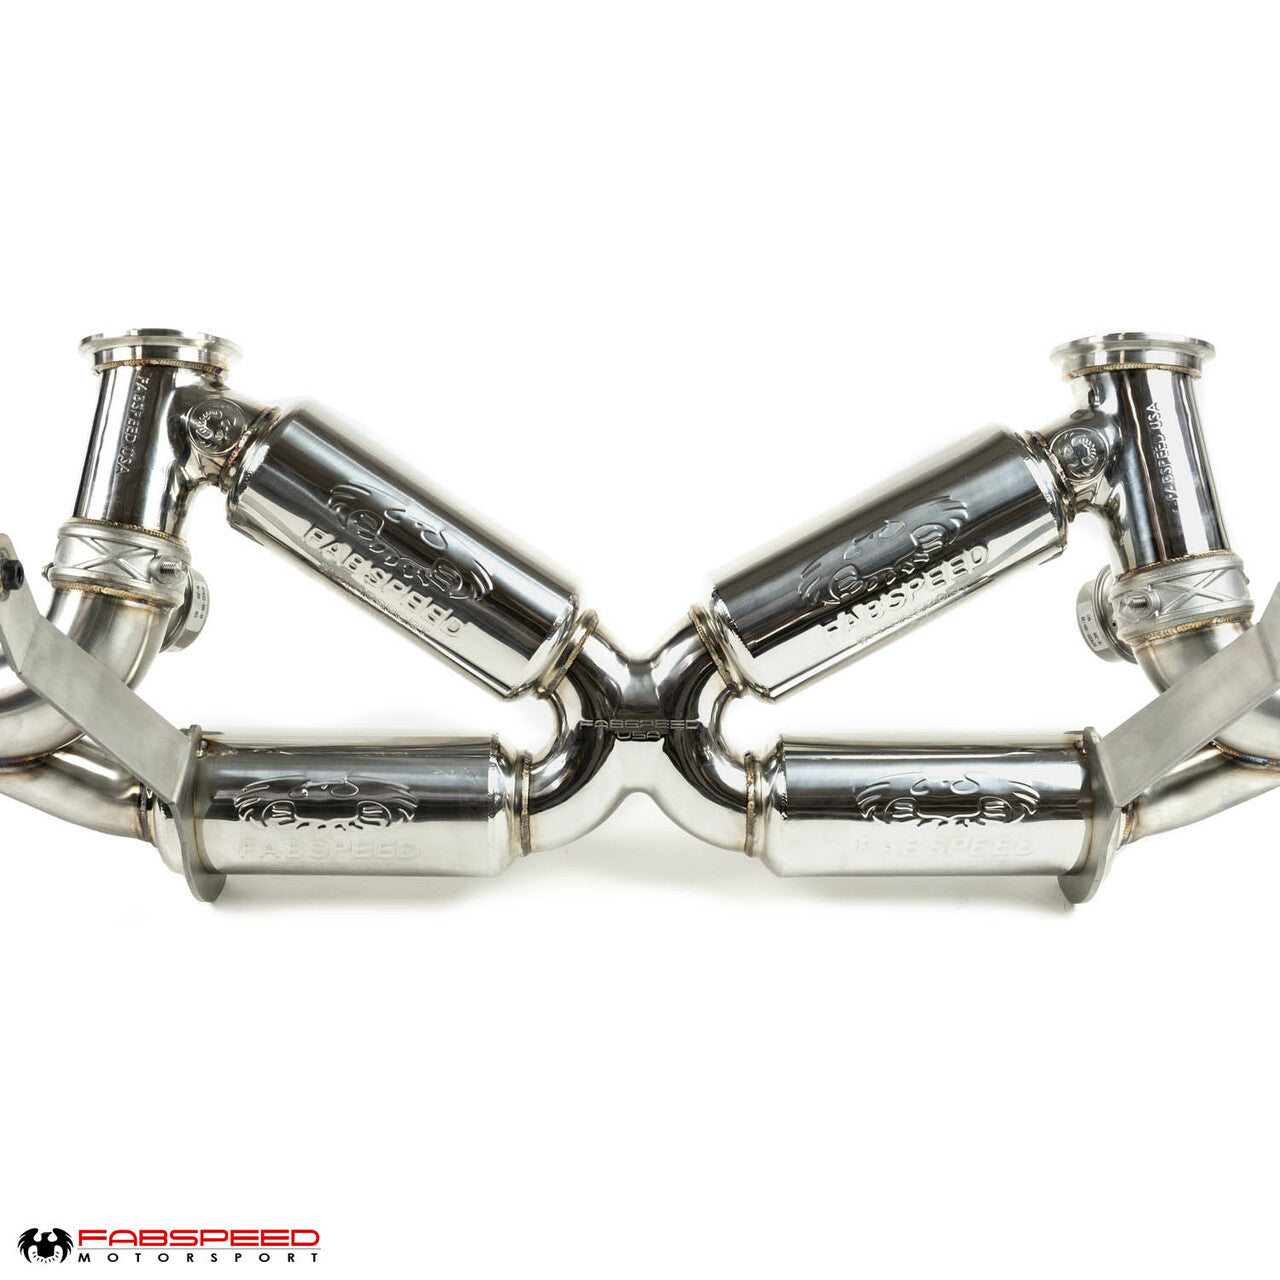 Fabspeed Audi R8 V10 Valvetronic Supersport X-Pipe Exhaust System (2009-2015)